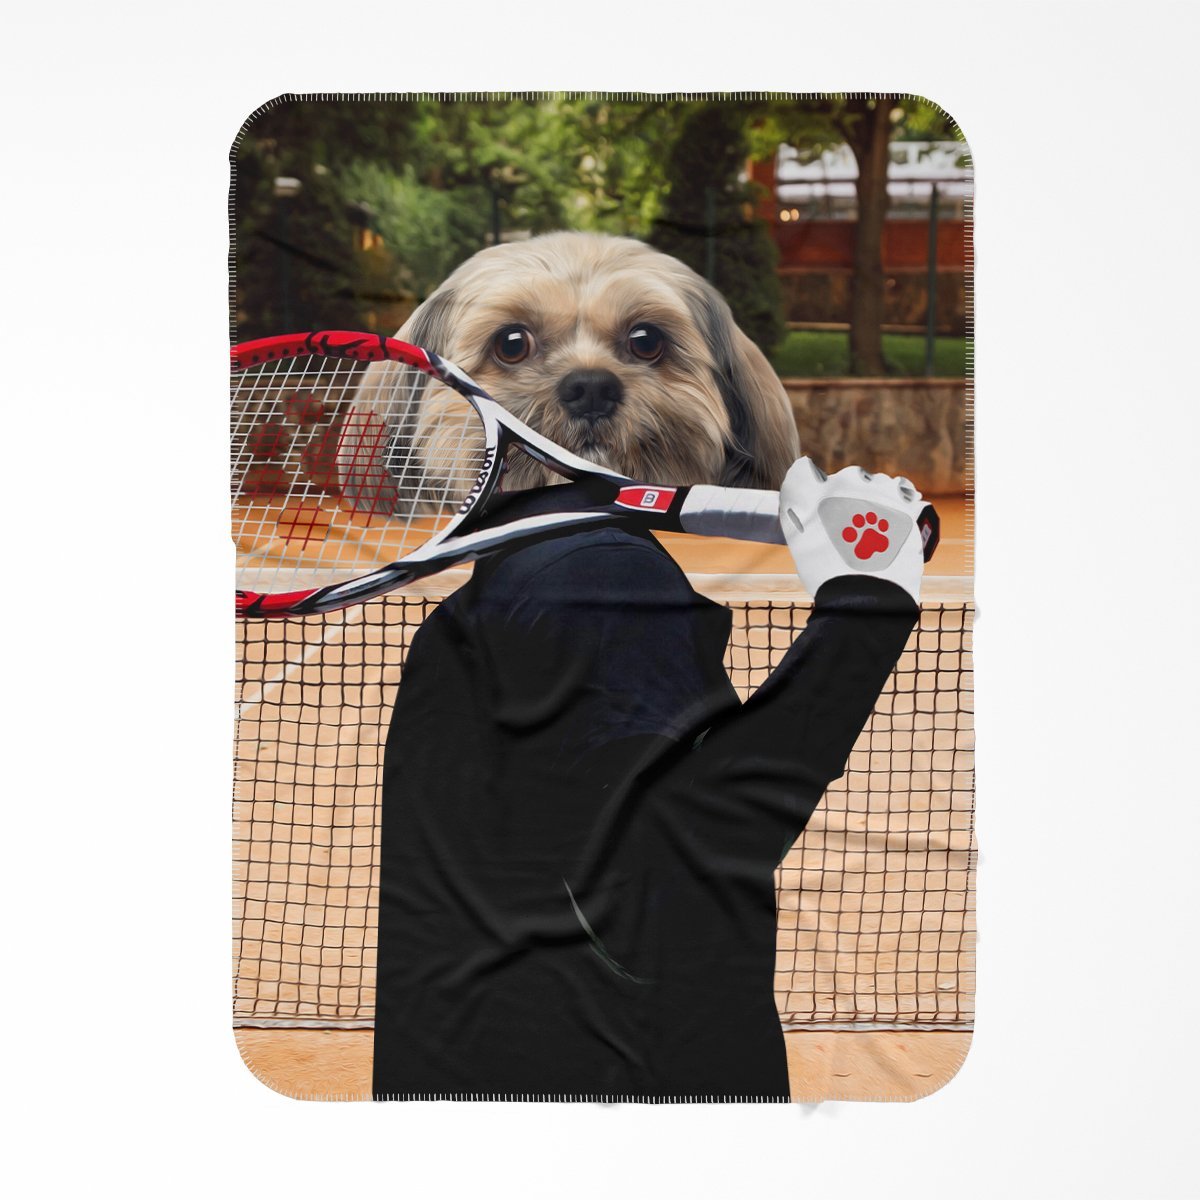 The Tennis Champion: Custom Pet Blanket - Paw & Glory - #pet portraits# - #dog portraits# - #pet portraits uk#Pawandglory, Pet art blanket,custom dog photo blanket, blanket with my dogs picture on it, cat picture on blanket, dog blanket photo, fleece blanket with dog picture